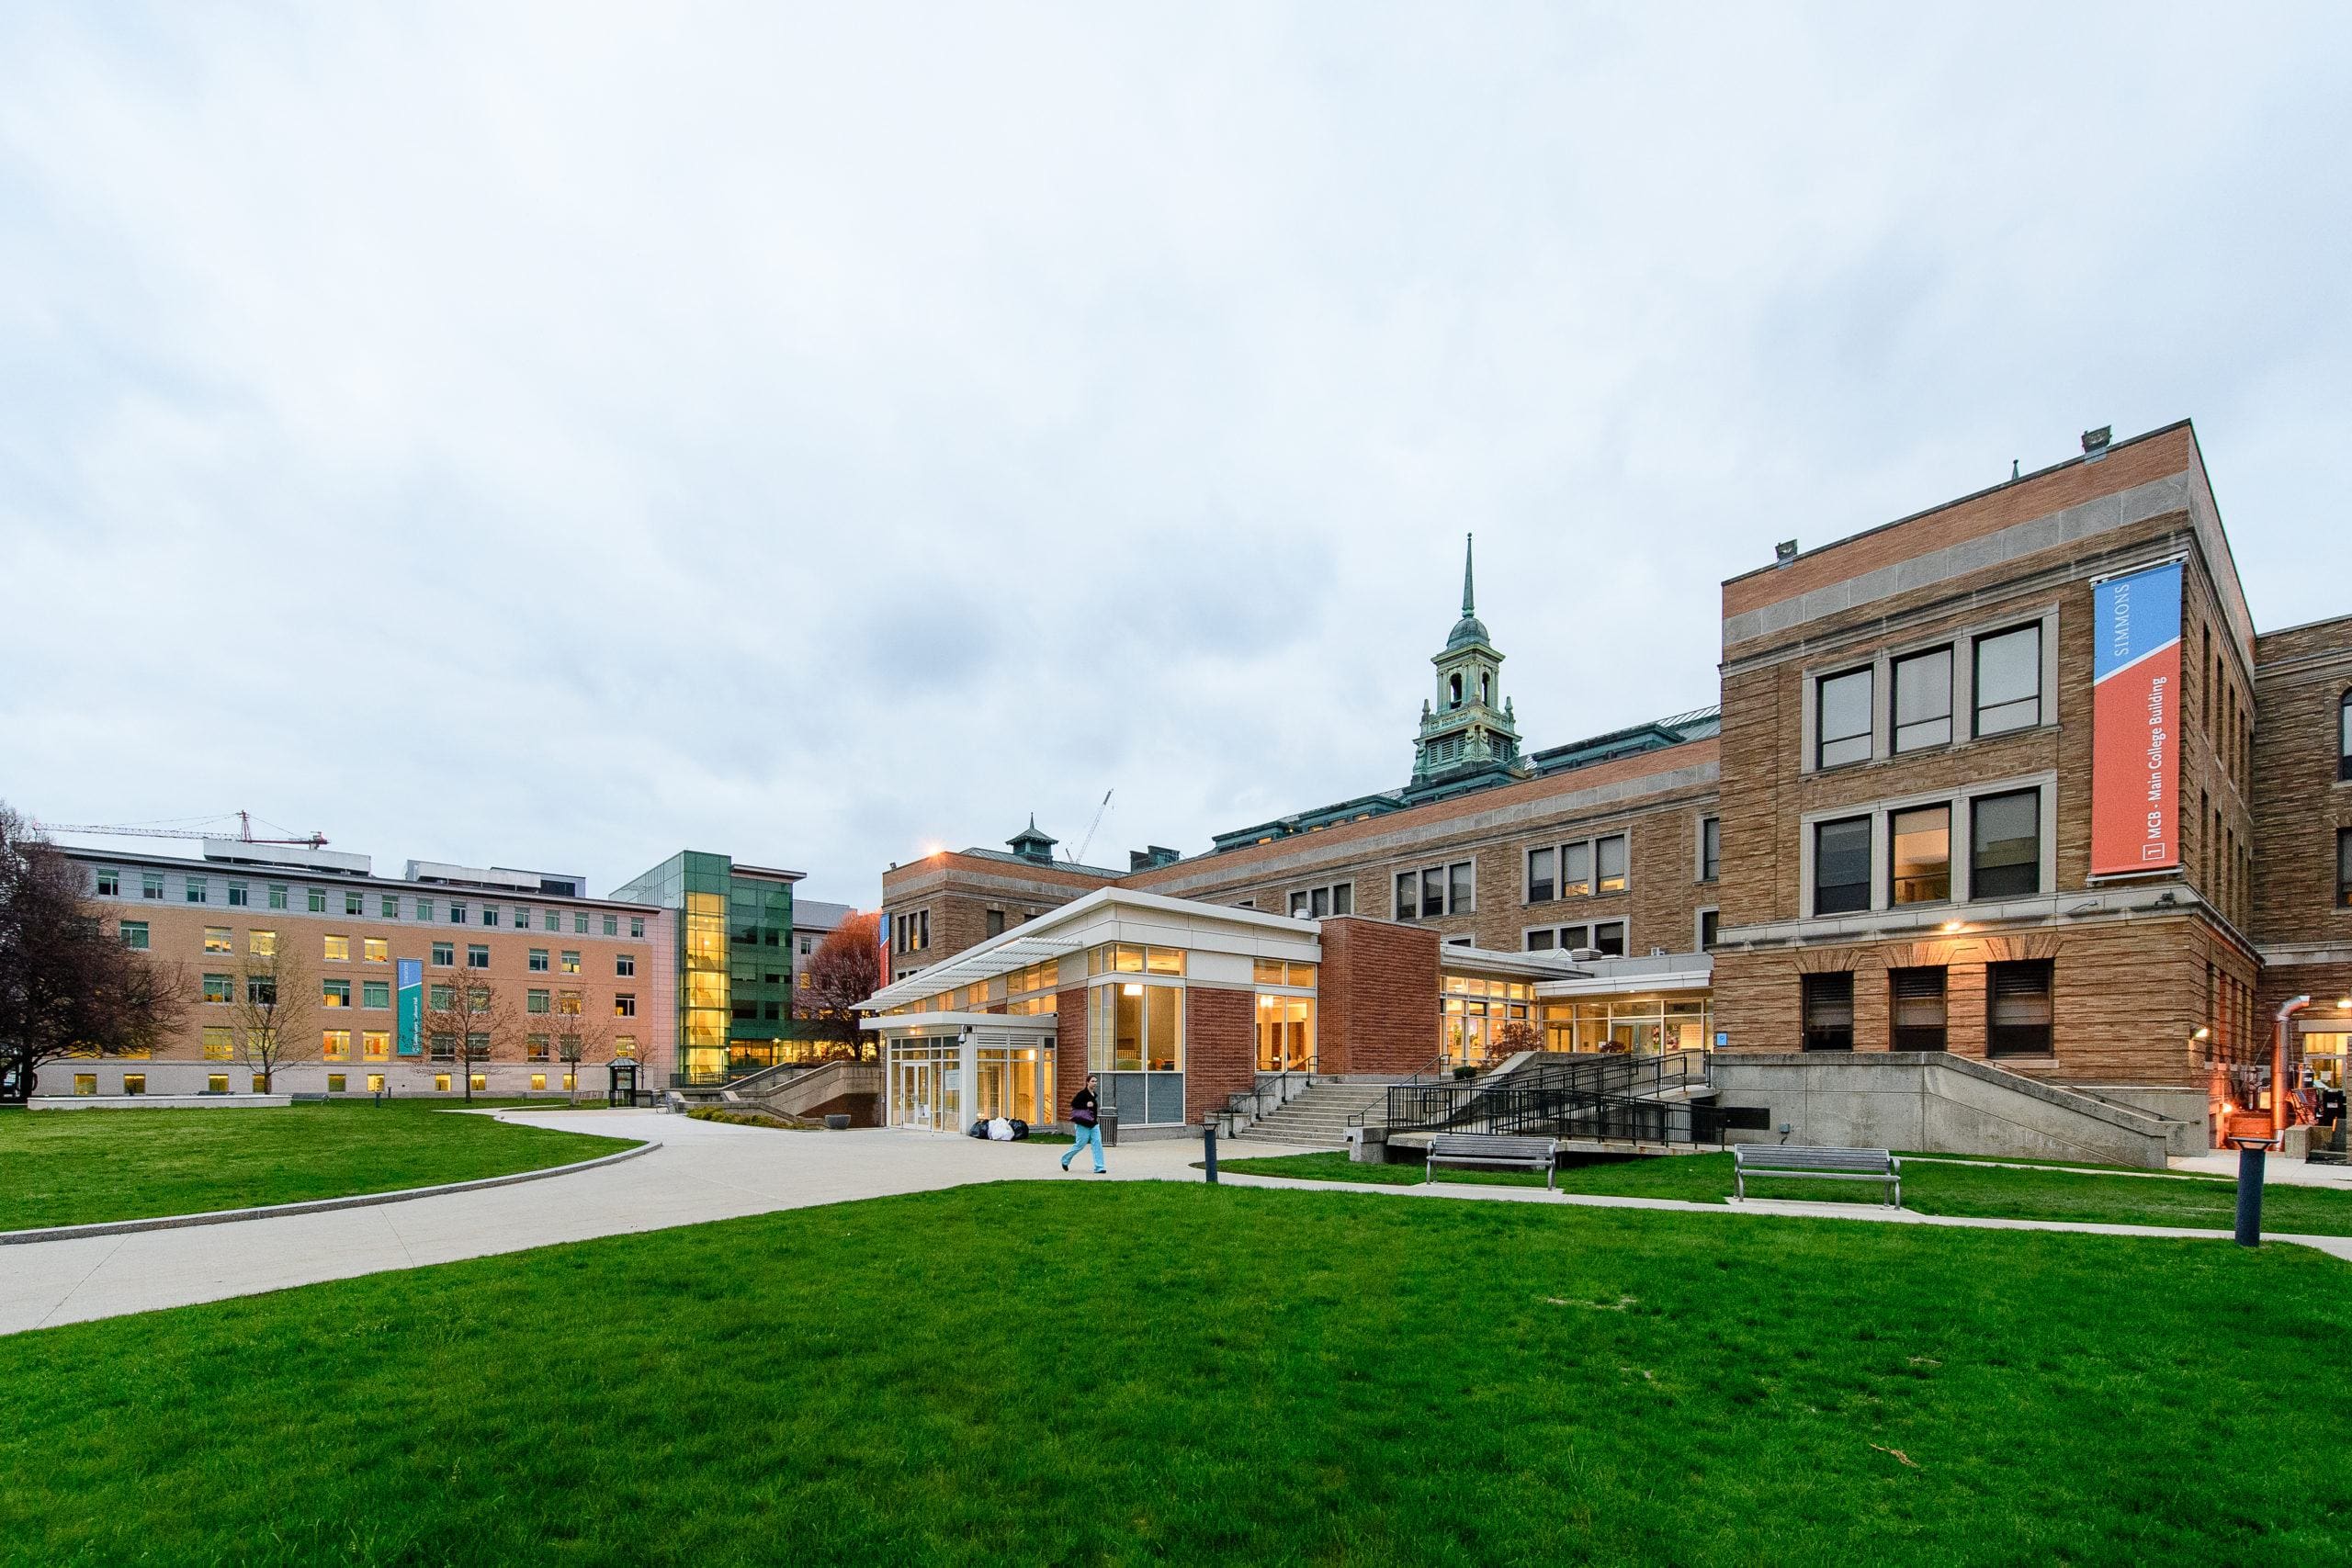 Photo of the Academic Quad with the Main College Building in the background